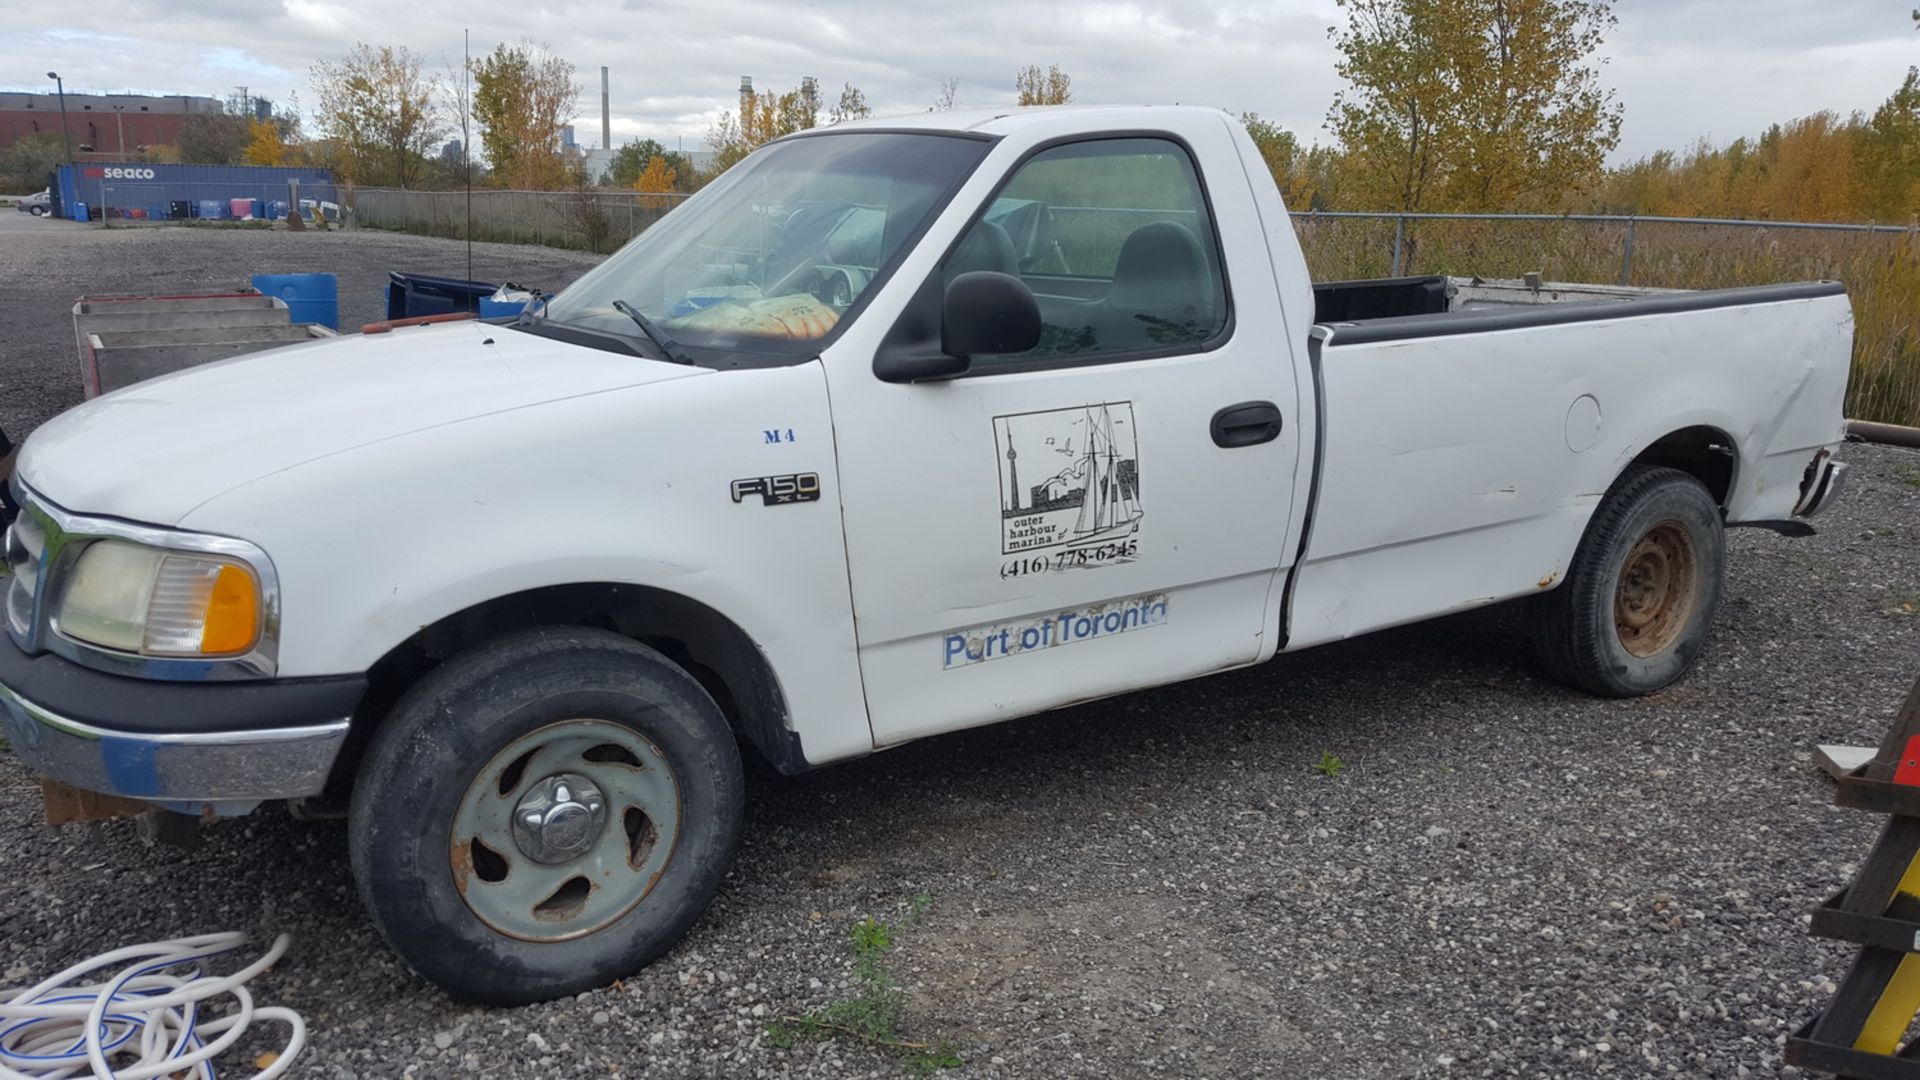 2001 FORD F150 XL PICKUP TRUCK, VIN 2FTZF17251CA60241 (80,285 kms) TRUCK IS NOT ROAD WORTHY (AS IS)